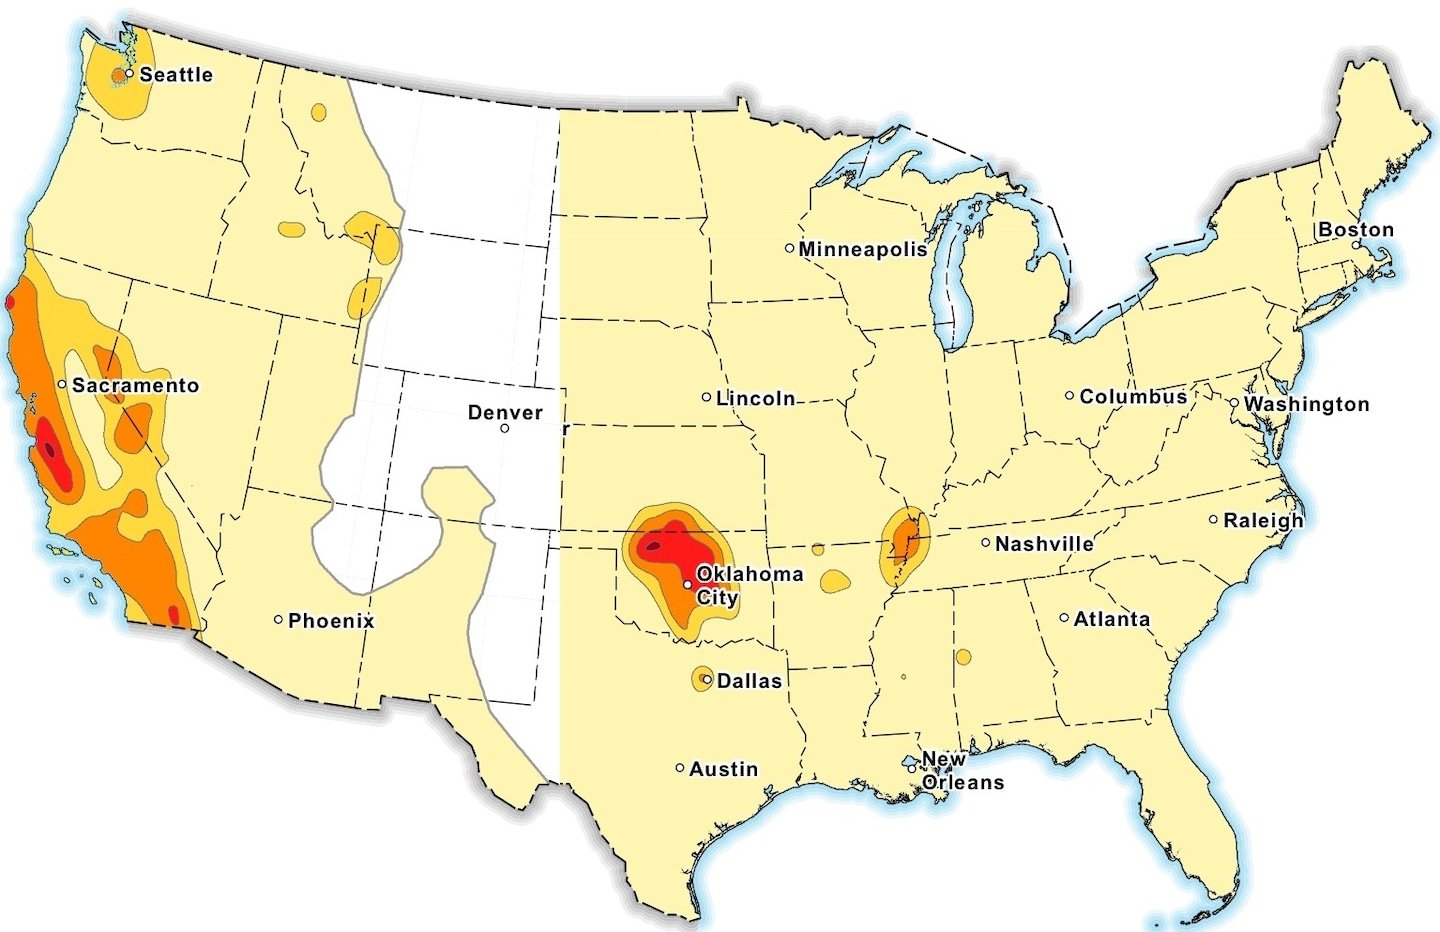 7 million Americans at risk of man-made earthquakes, USGS says